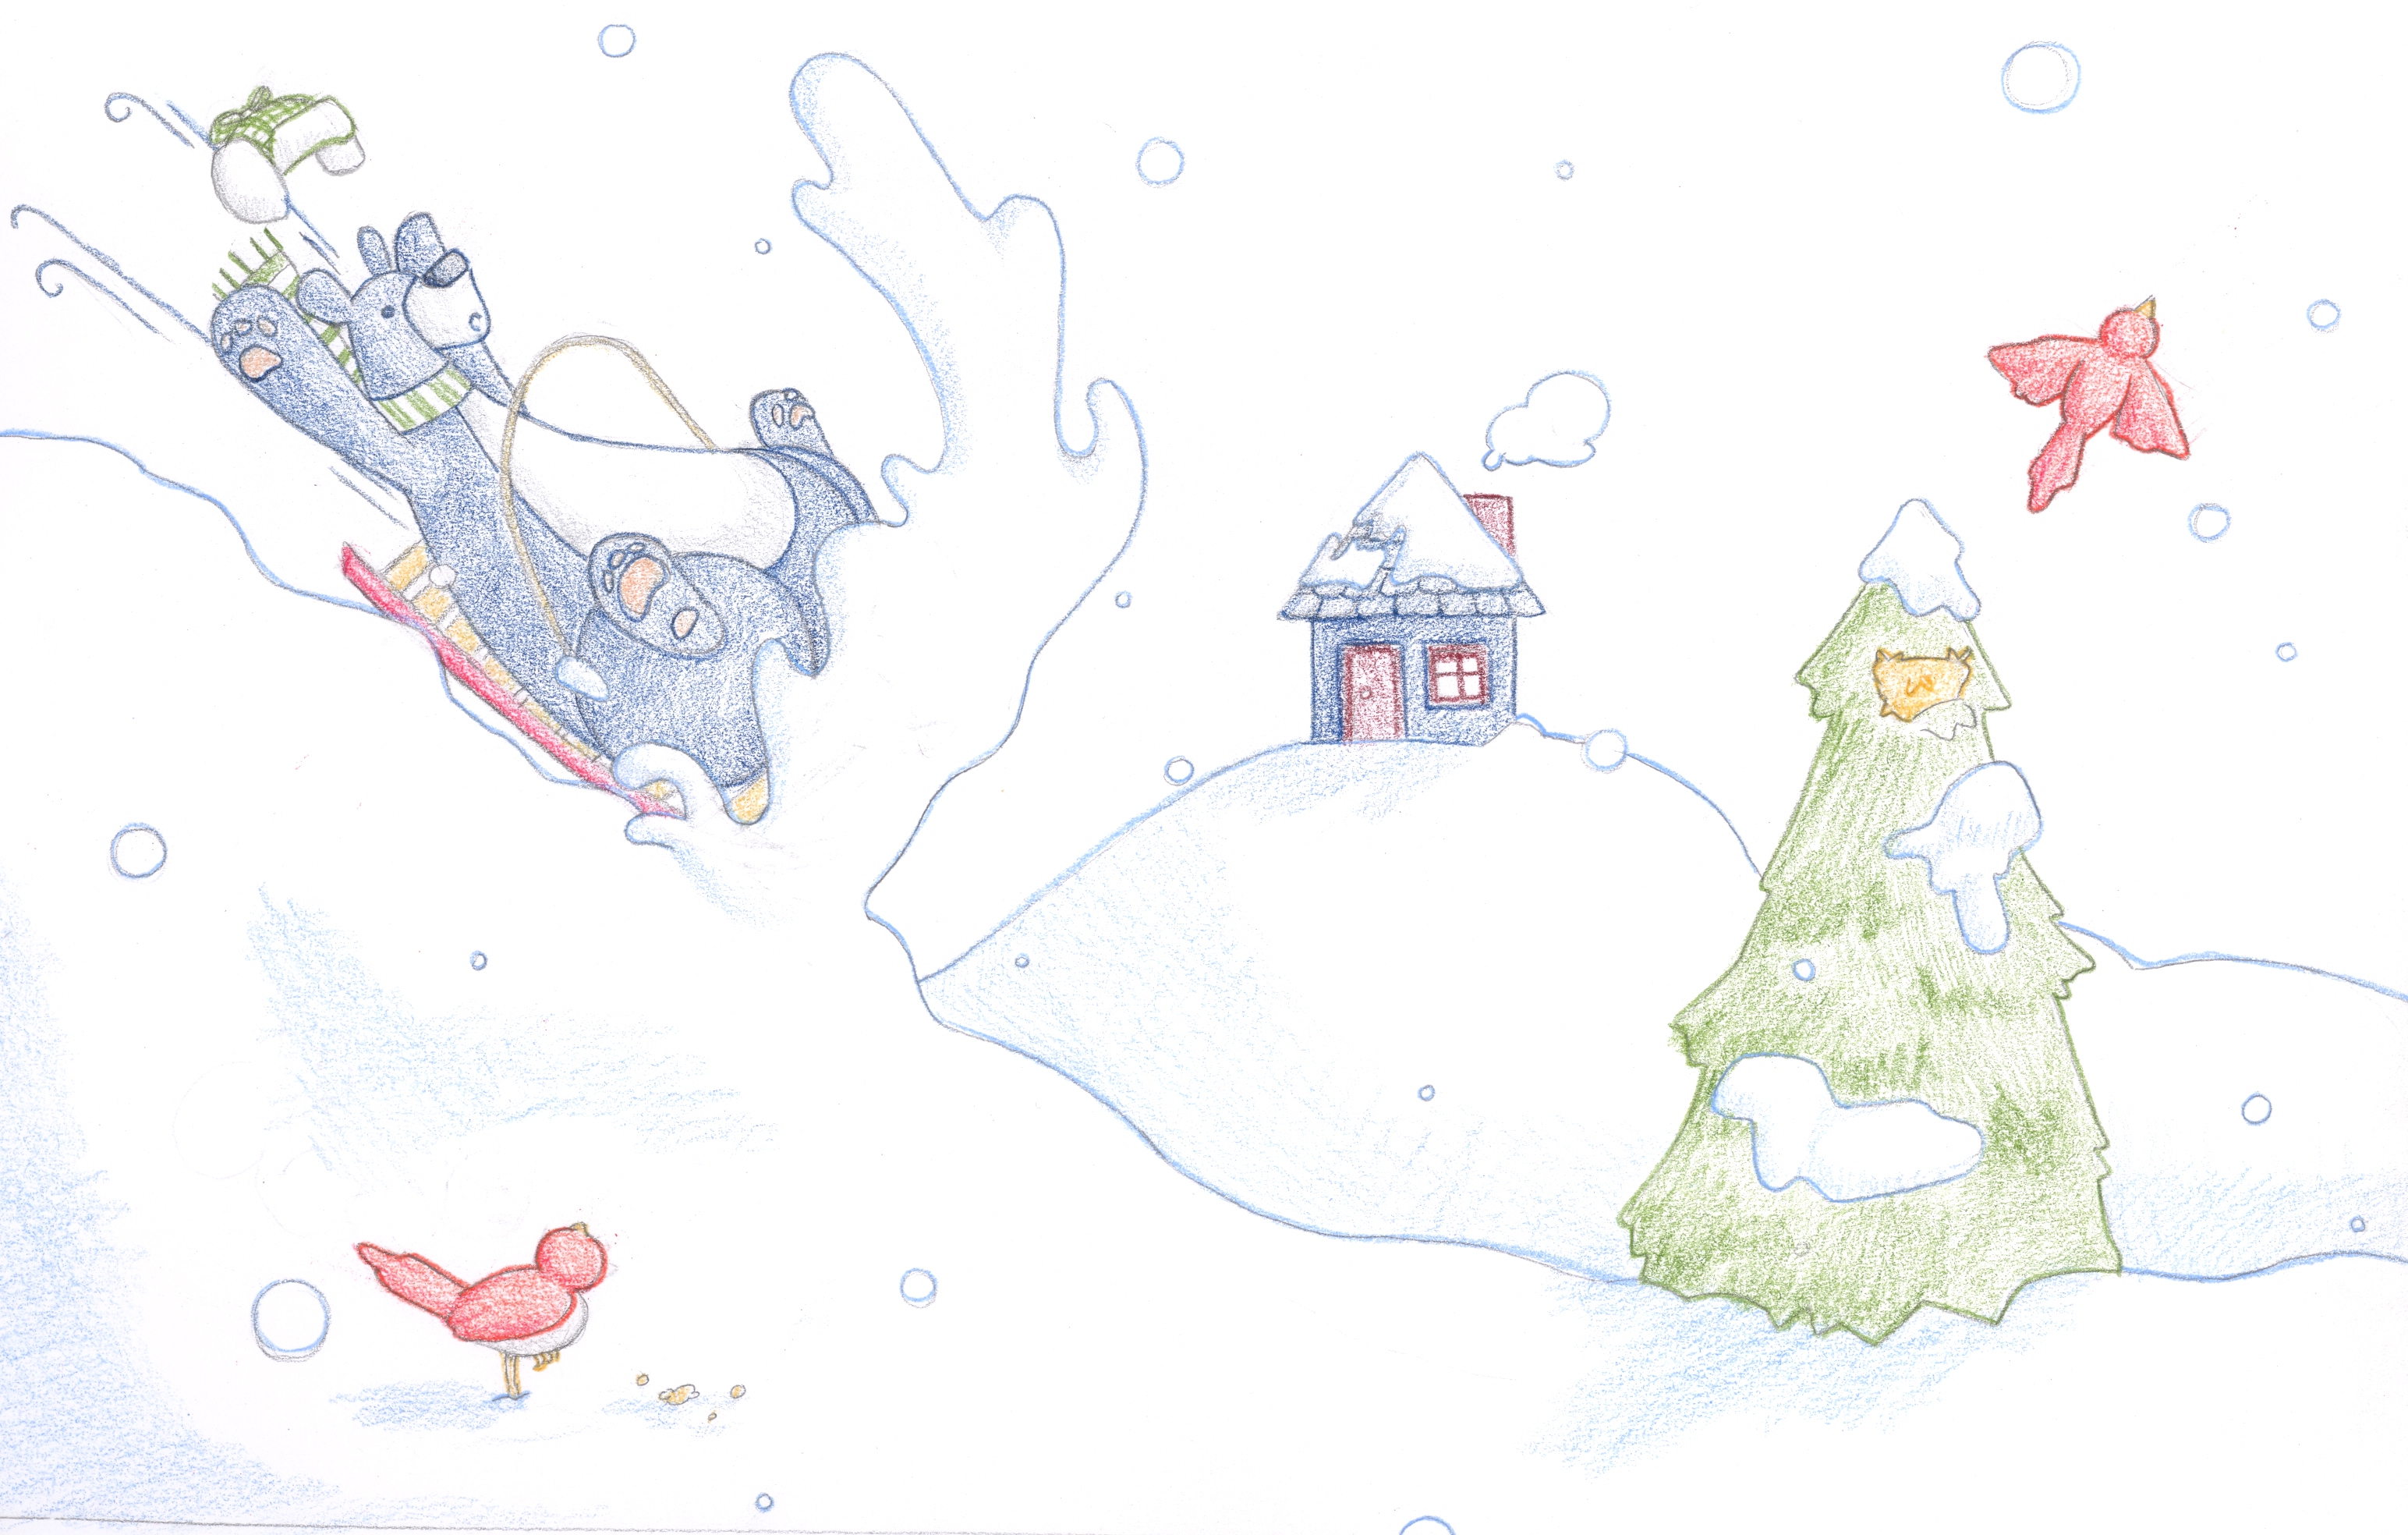 a blue bear in a hat and scarf is sledding out of control down a hil towards an evergreen with a nest, a red bird flies from the nest, another stops eating seeds to watch the bear, in the background is a little house with a chimney and a puff of smoke, snow is falling